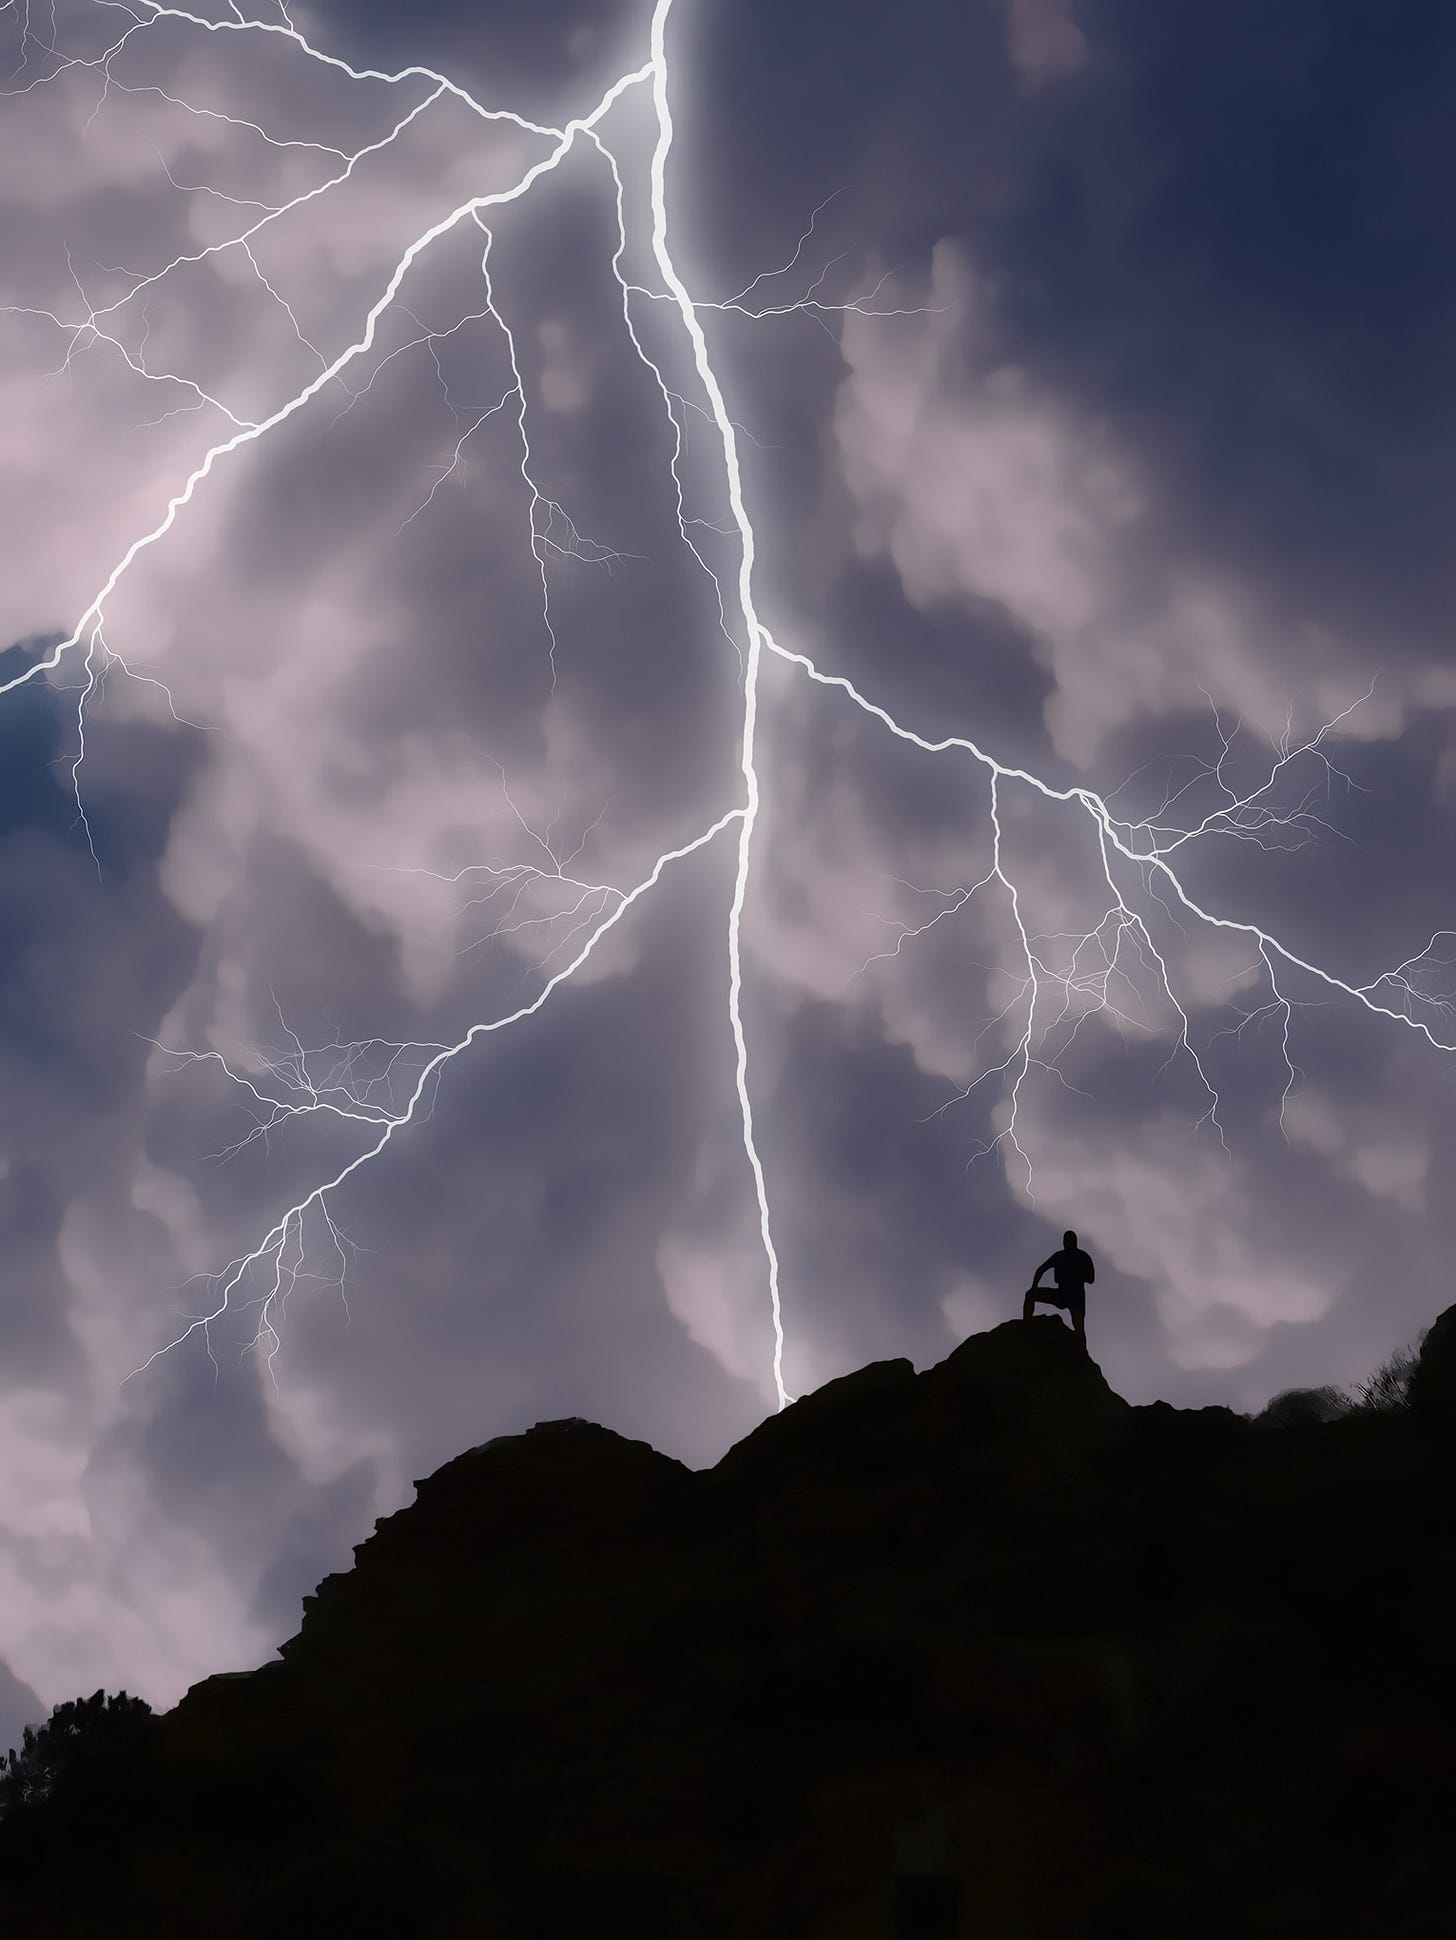 Person standing on a hillside under a large bolt of lightning